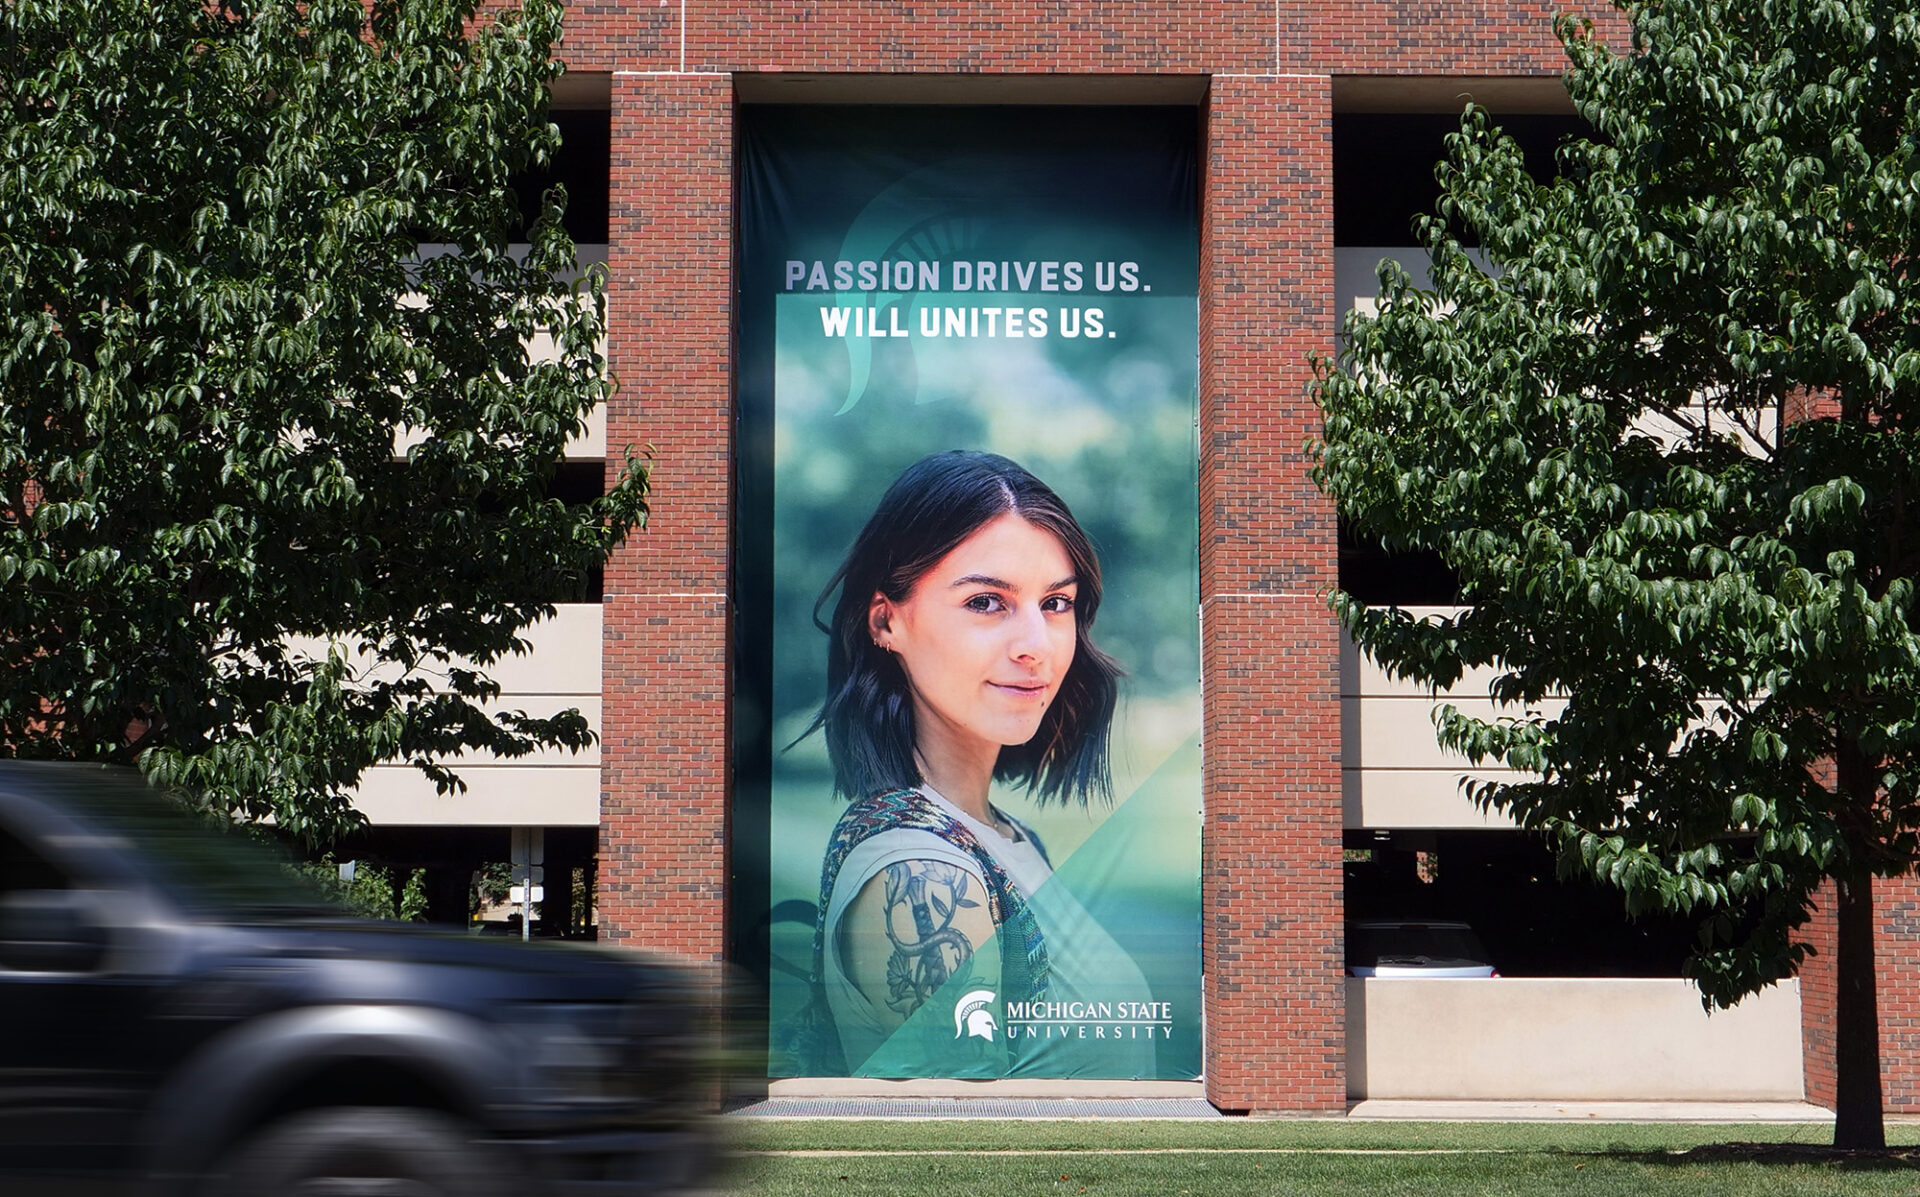 Michigan State University Exterior Banner with headline "Passion Drives Us. Will Unites Us."